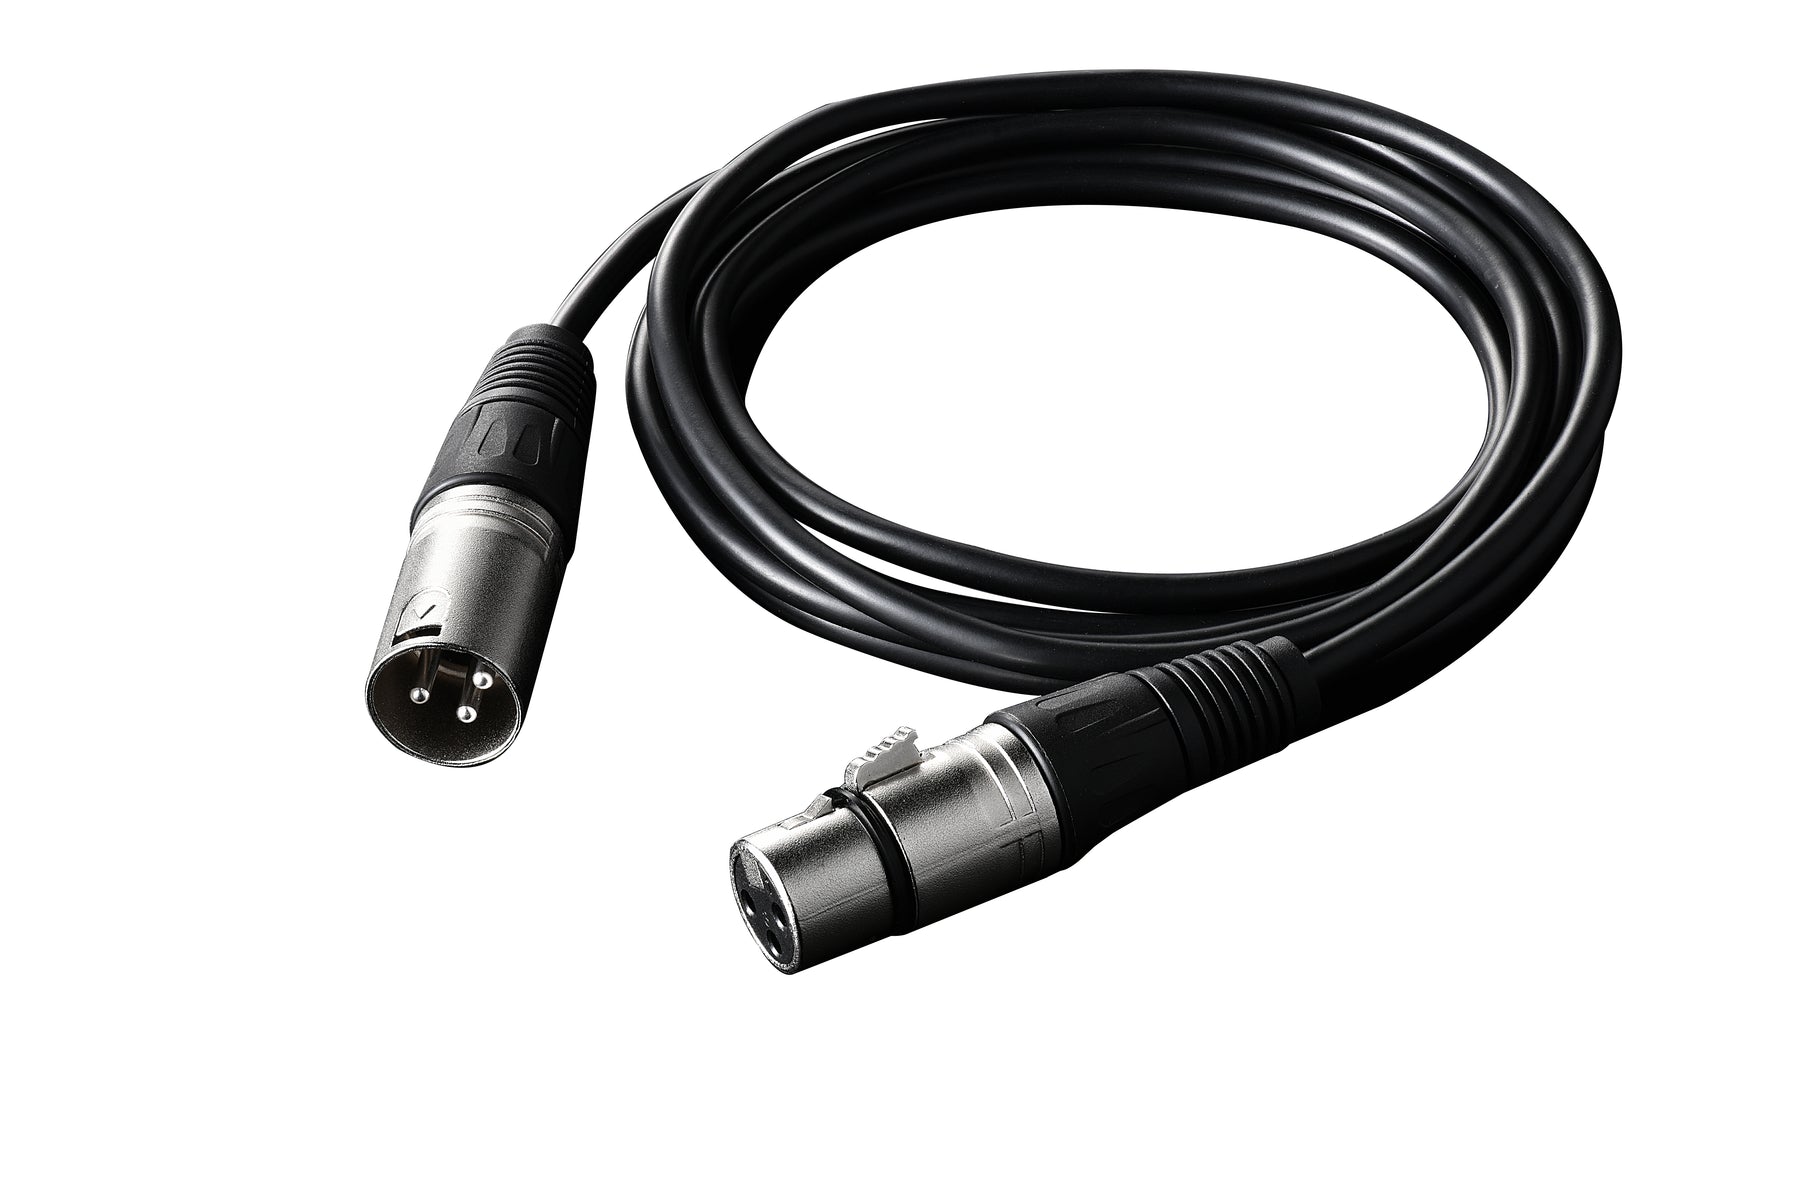 IBRA XLR Mic Cable Premium Quality Pro Microphone Lead | Balanced Male XLR to Female XLR | 2 Metre | Clearer Sound for PA Systems, Studio Recording, Mixers, Amplification & Speakers - BLACK